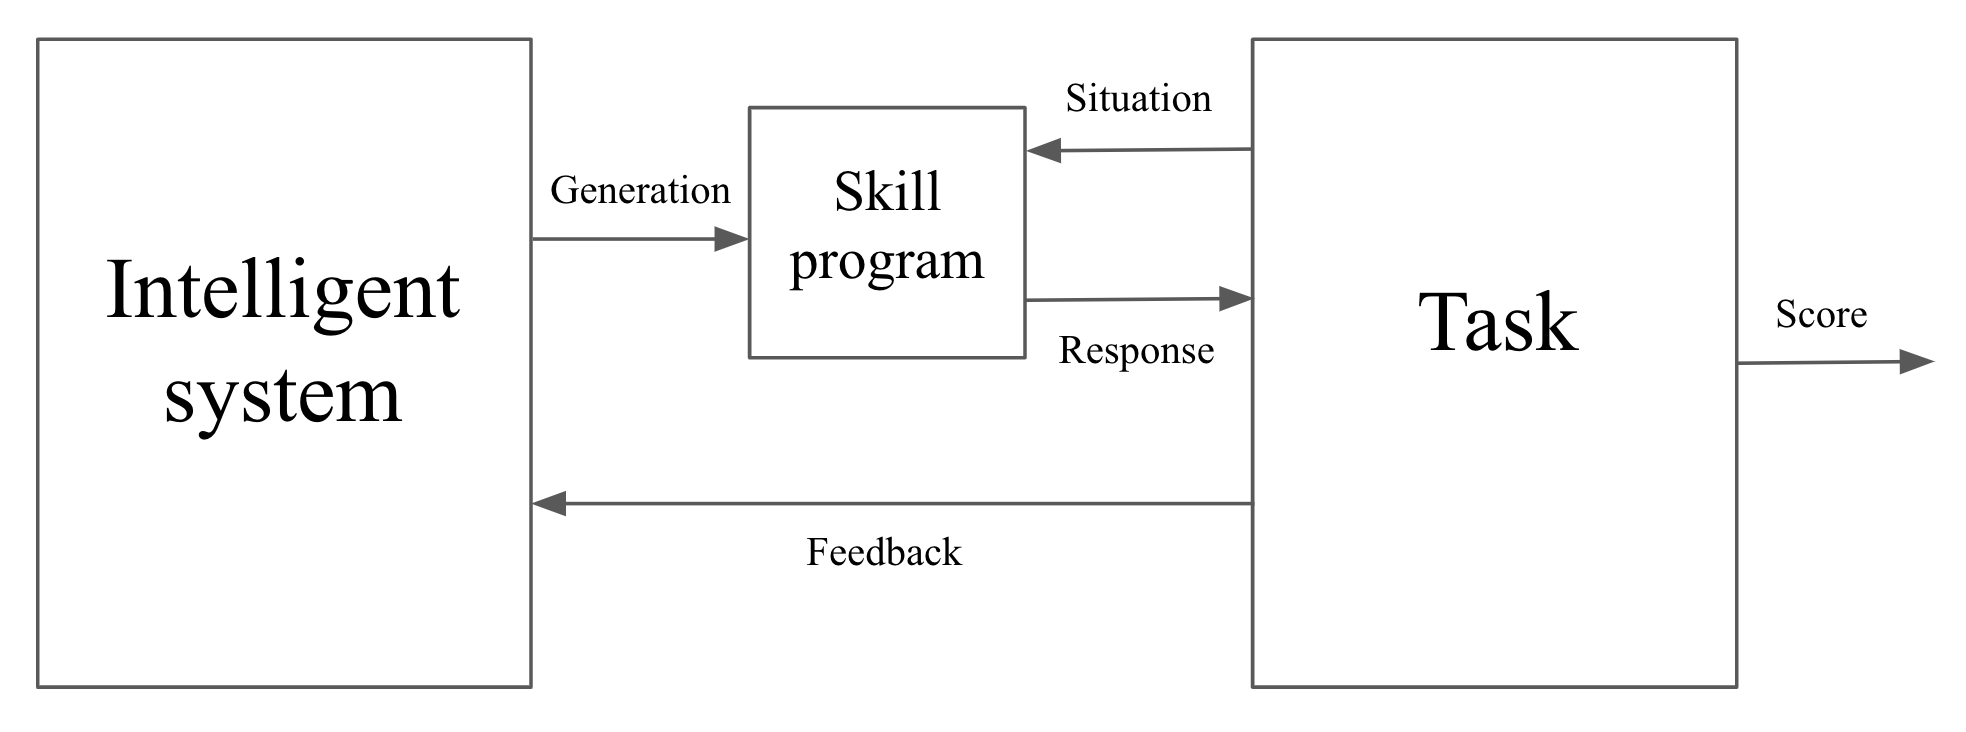 Position of the problem: an intelligent system generates a skill program to interact with a task.